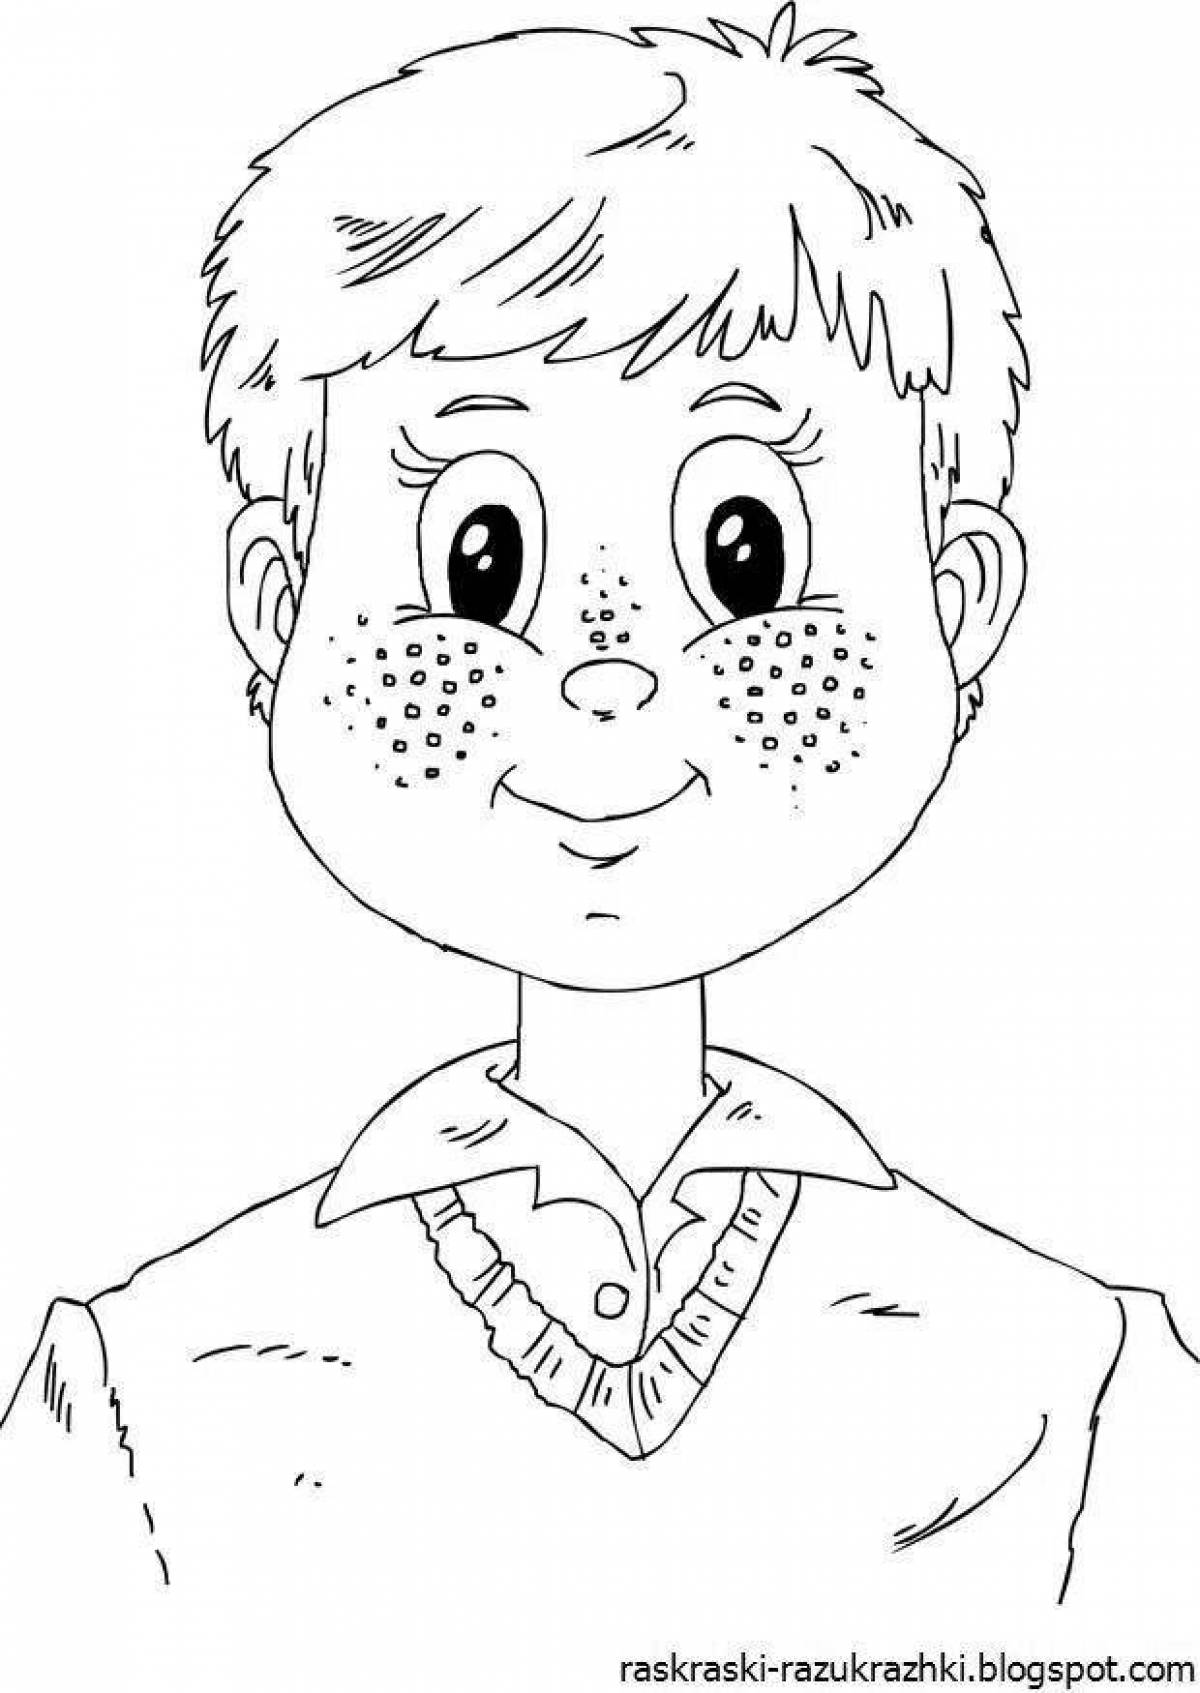 Human face for kids #12